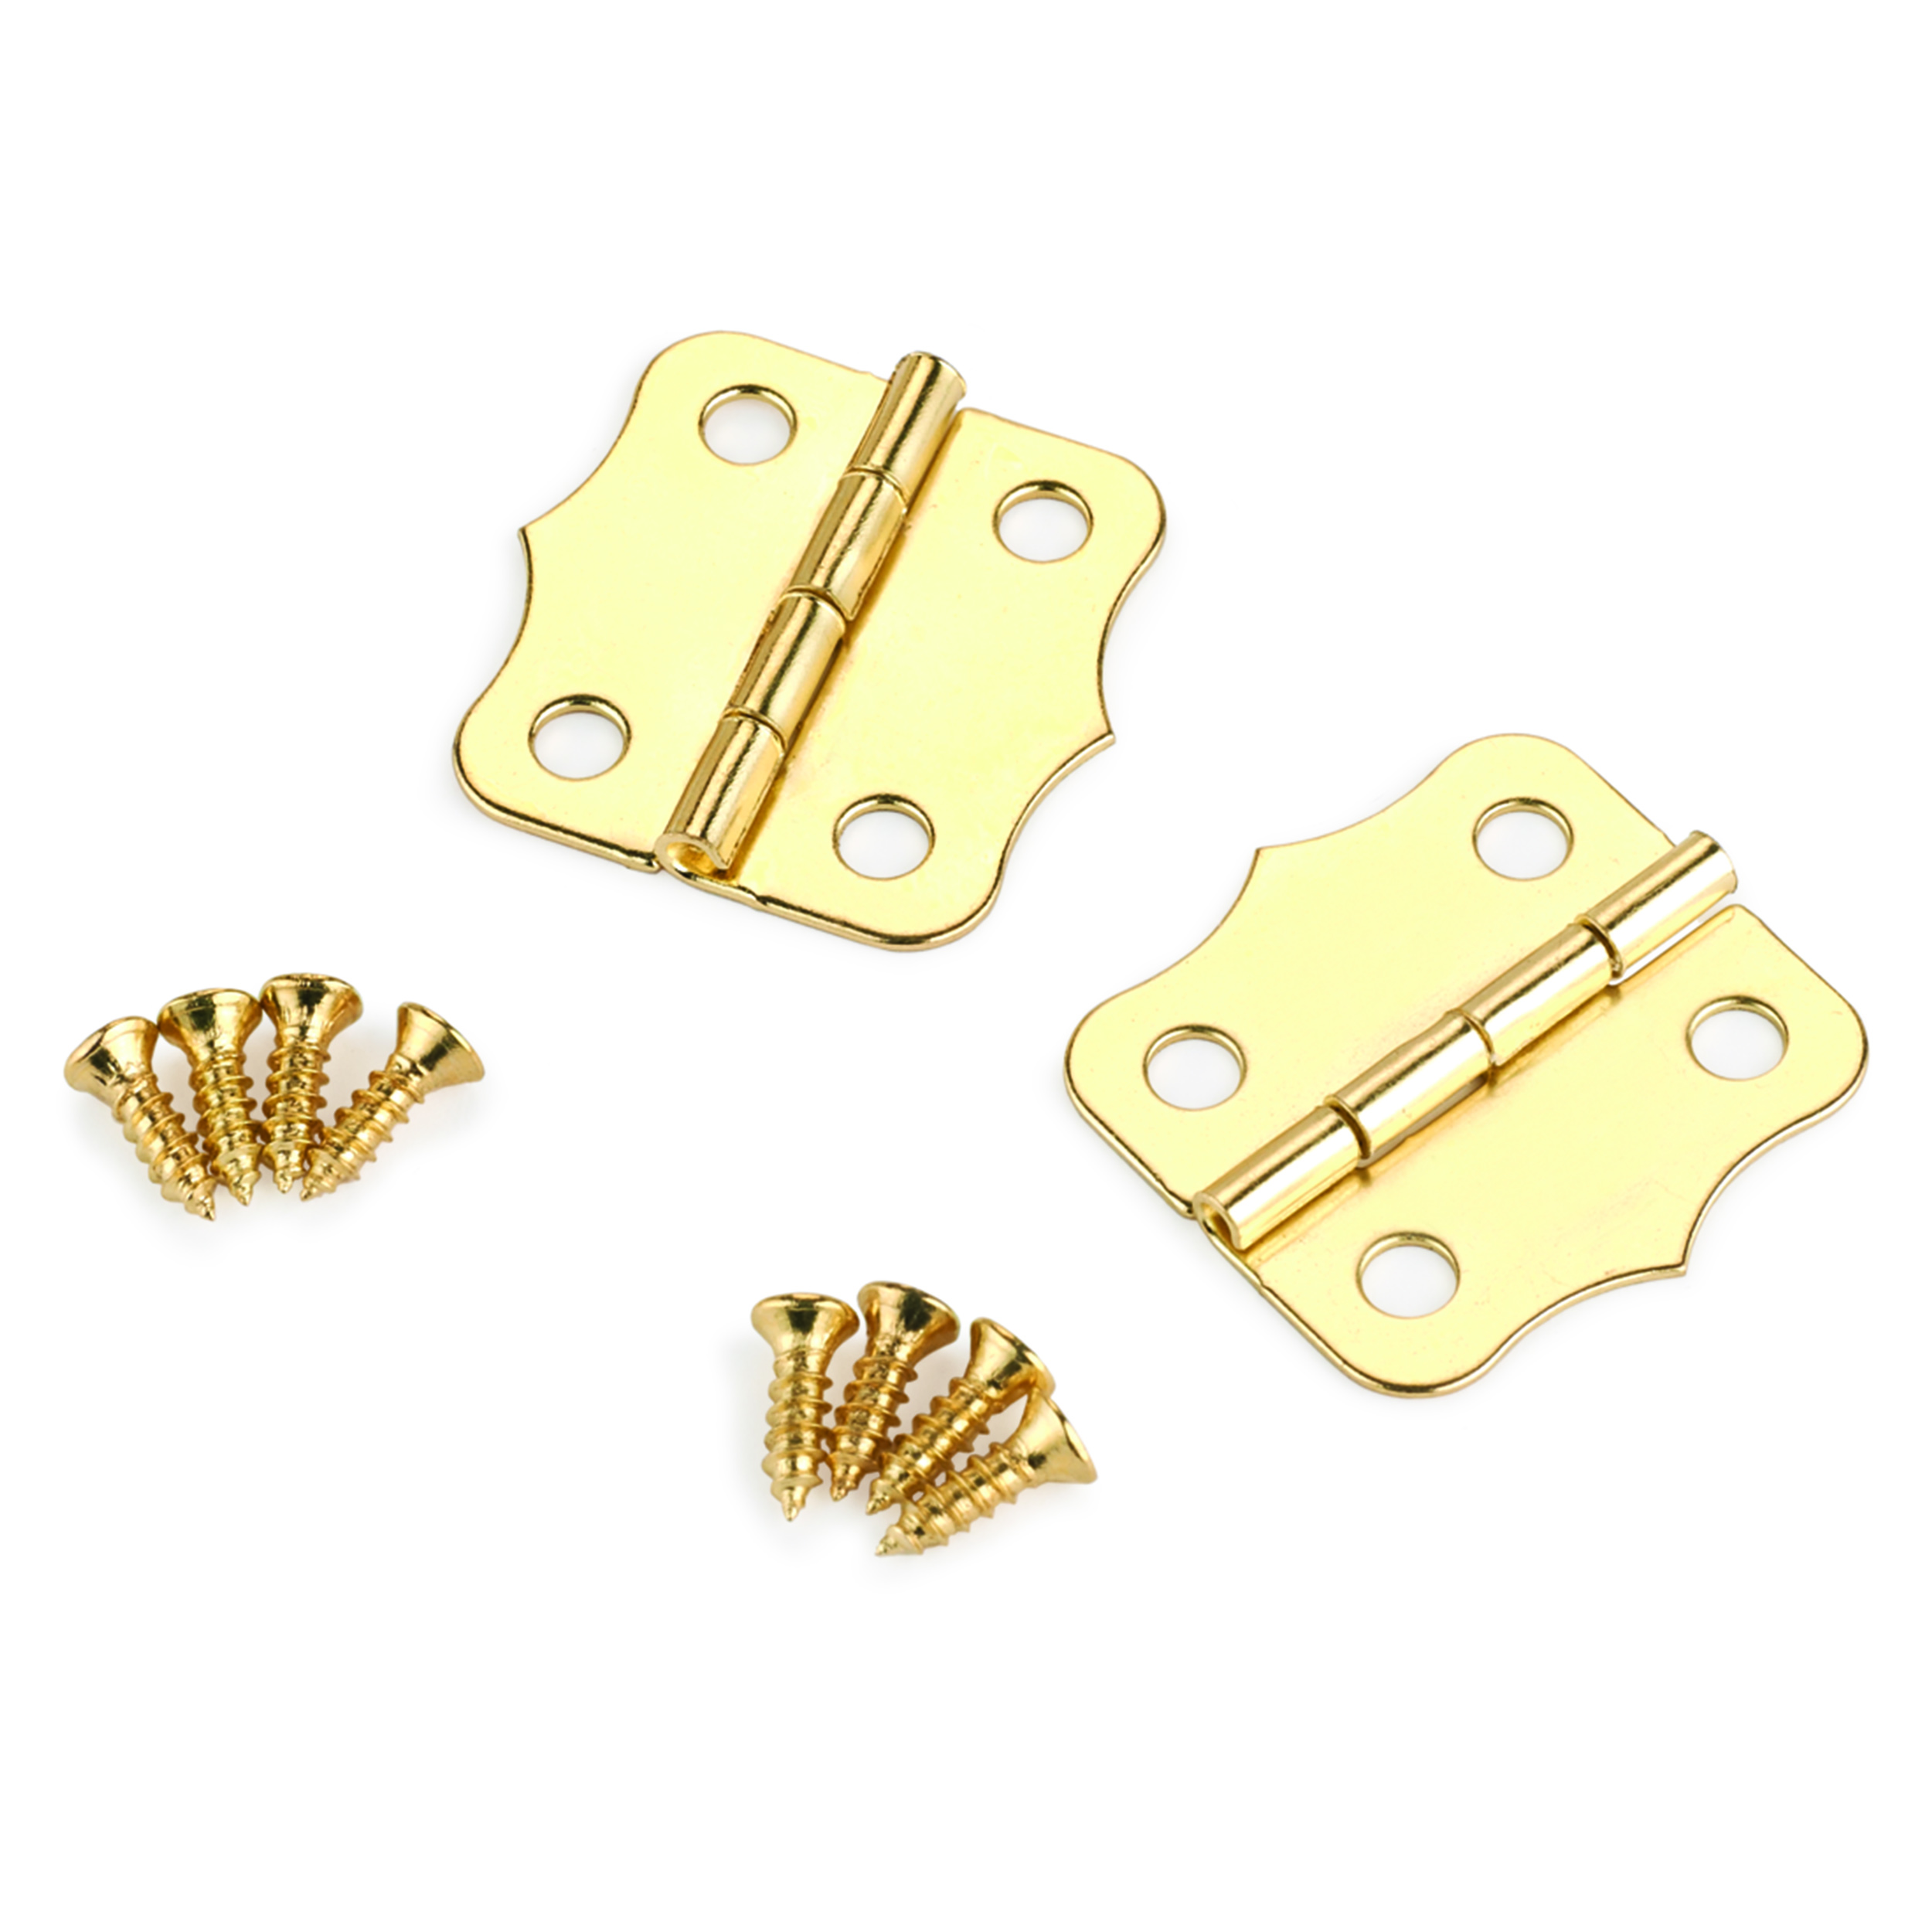 Small Box Brass Plated Hinge 24mm X 24mm Pair